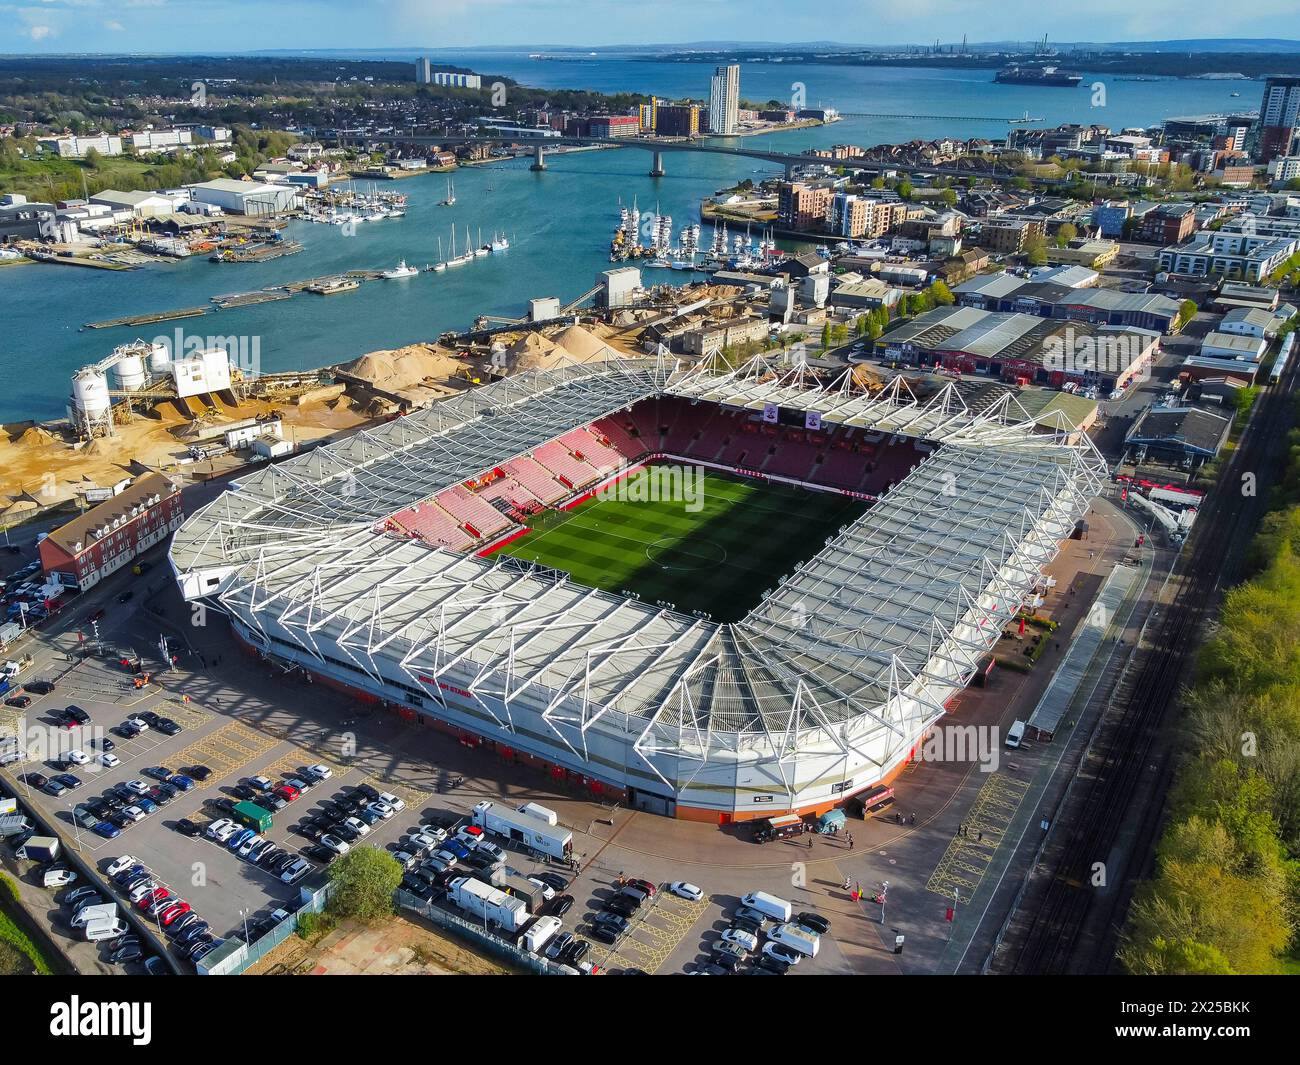 General aerial view of St Mary’s stadium at Southampton in Hampshire, UK home of English Premier League football team Southampton FC. Stock Photo